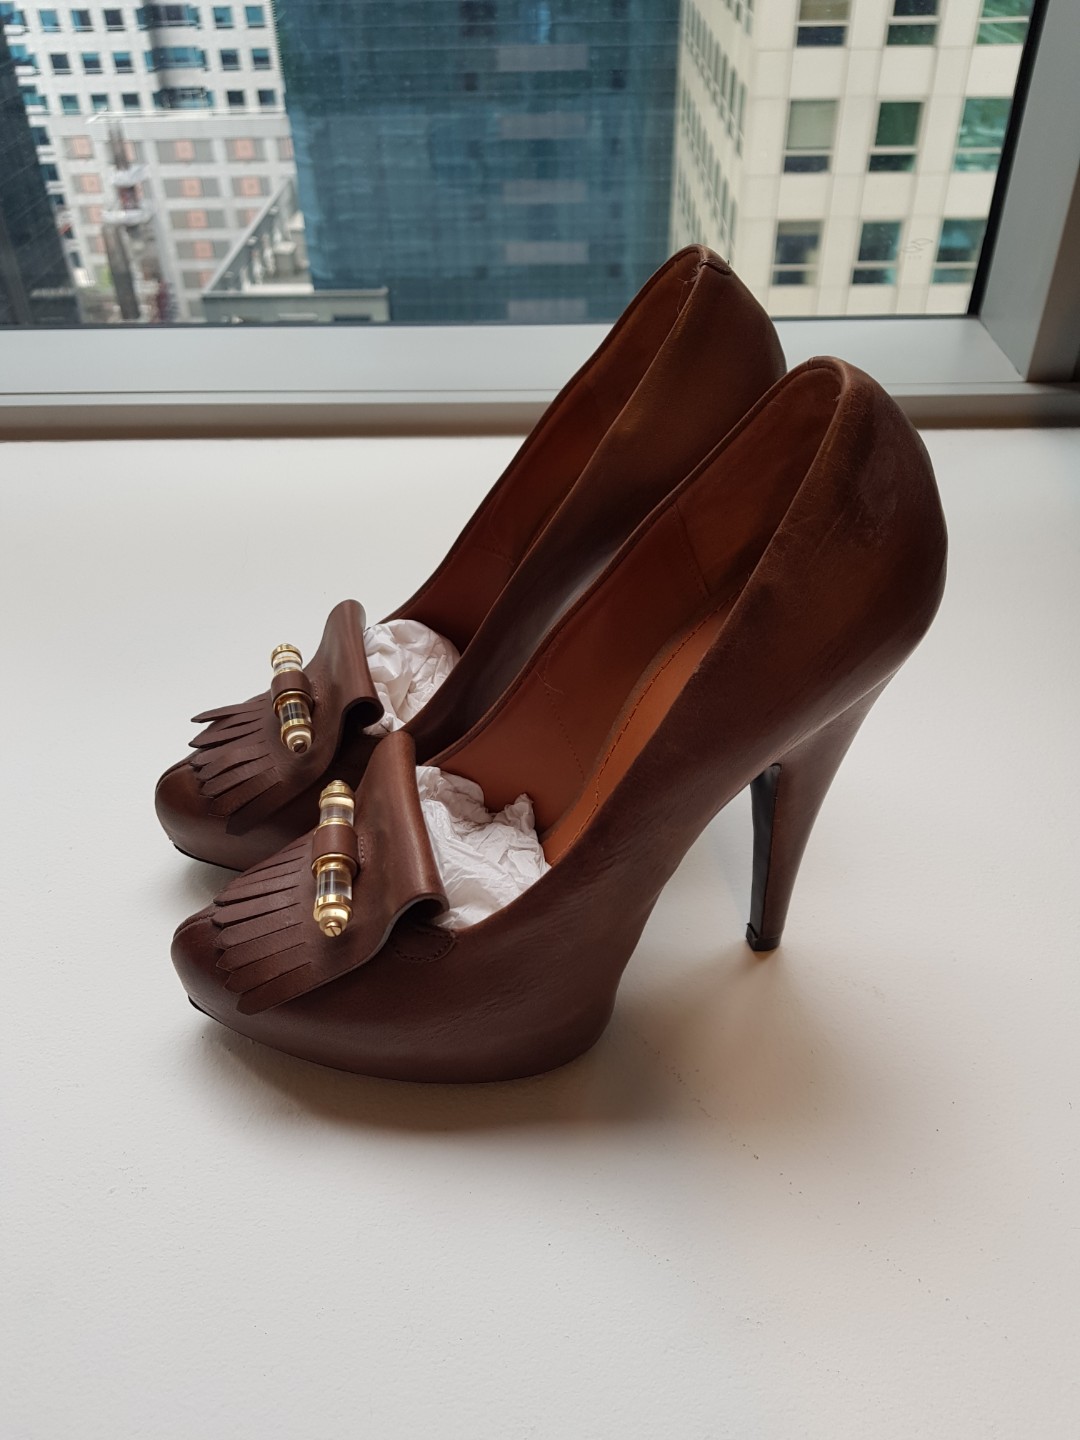 NEW GIVENCHY LEATHER HIGH HEELS Plateau 